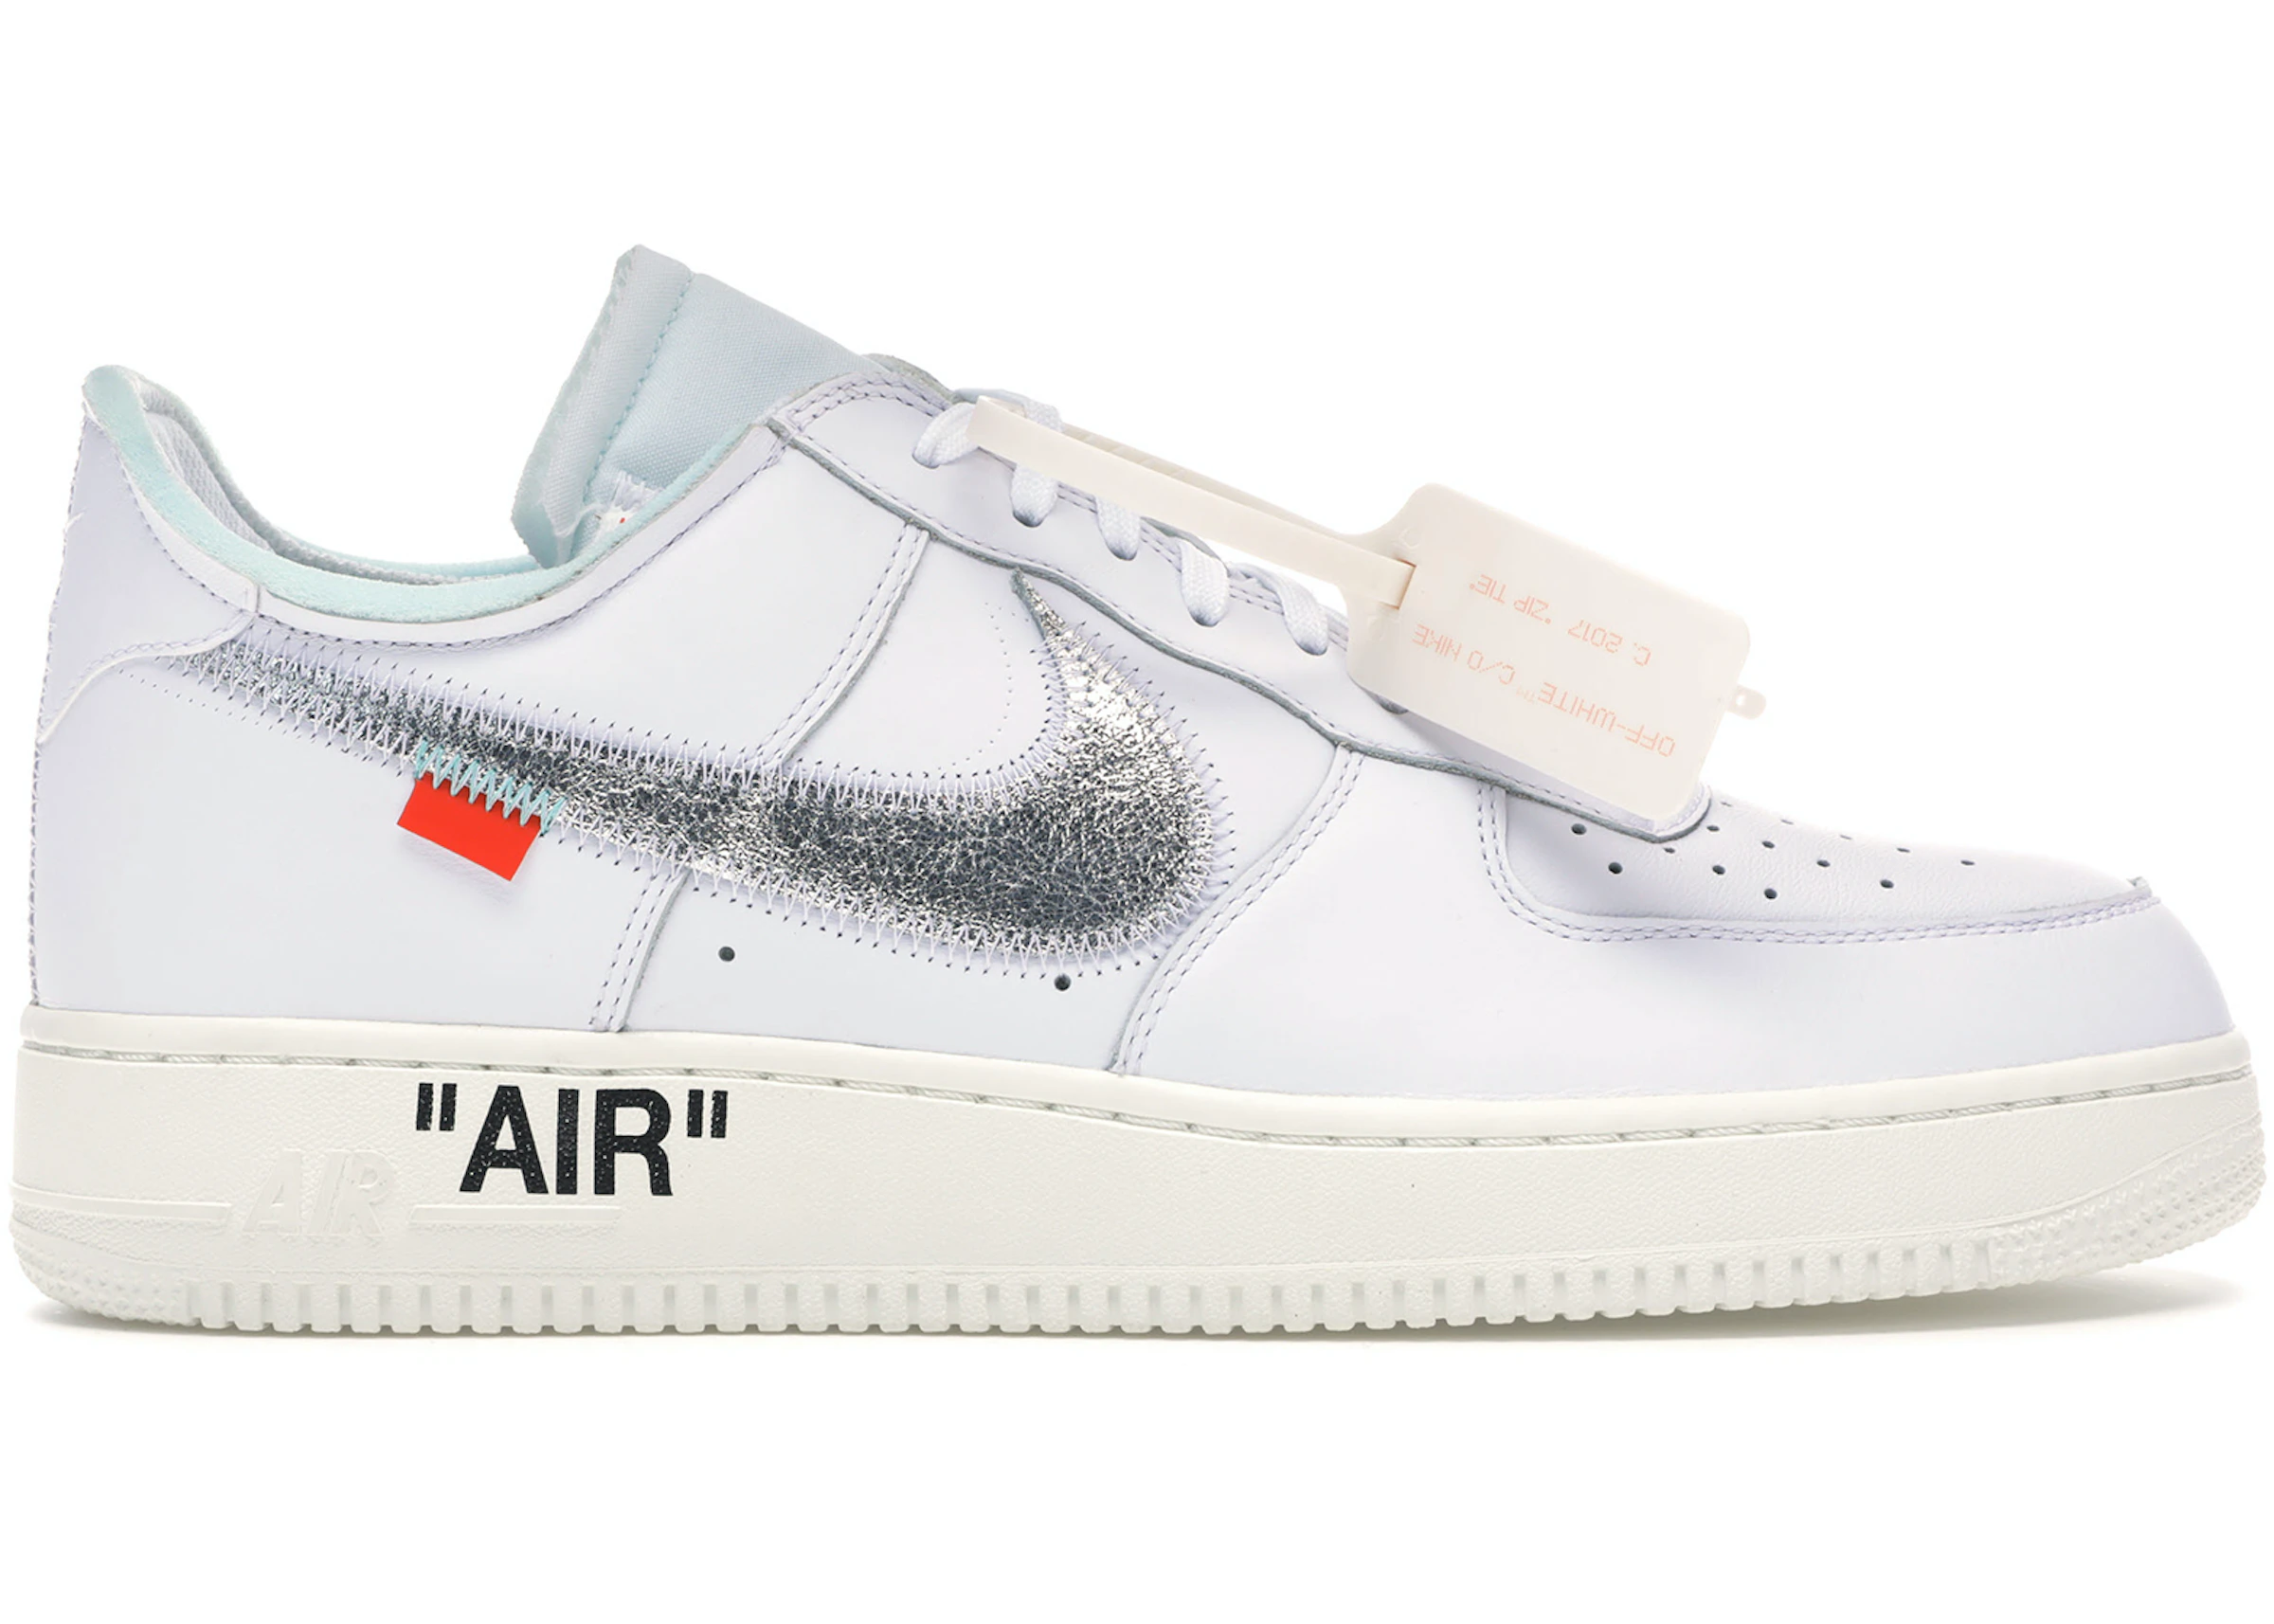 Buy Nike nike platform air force 1 Air Force Shoes & New Sneakers - StockX